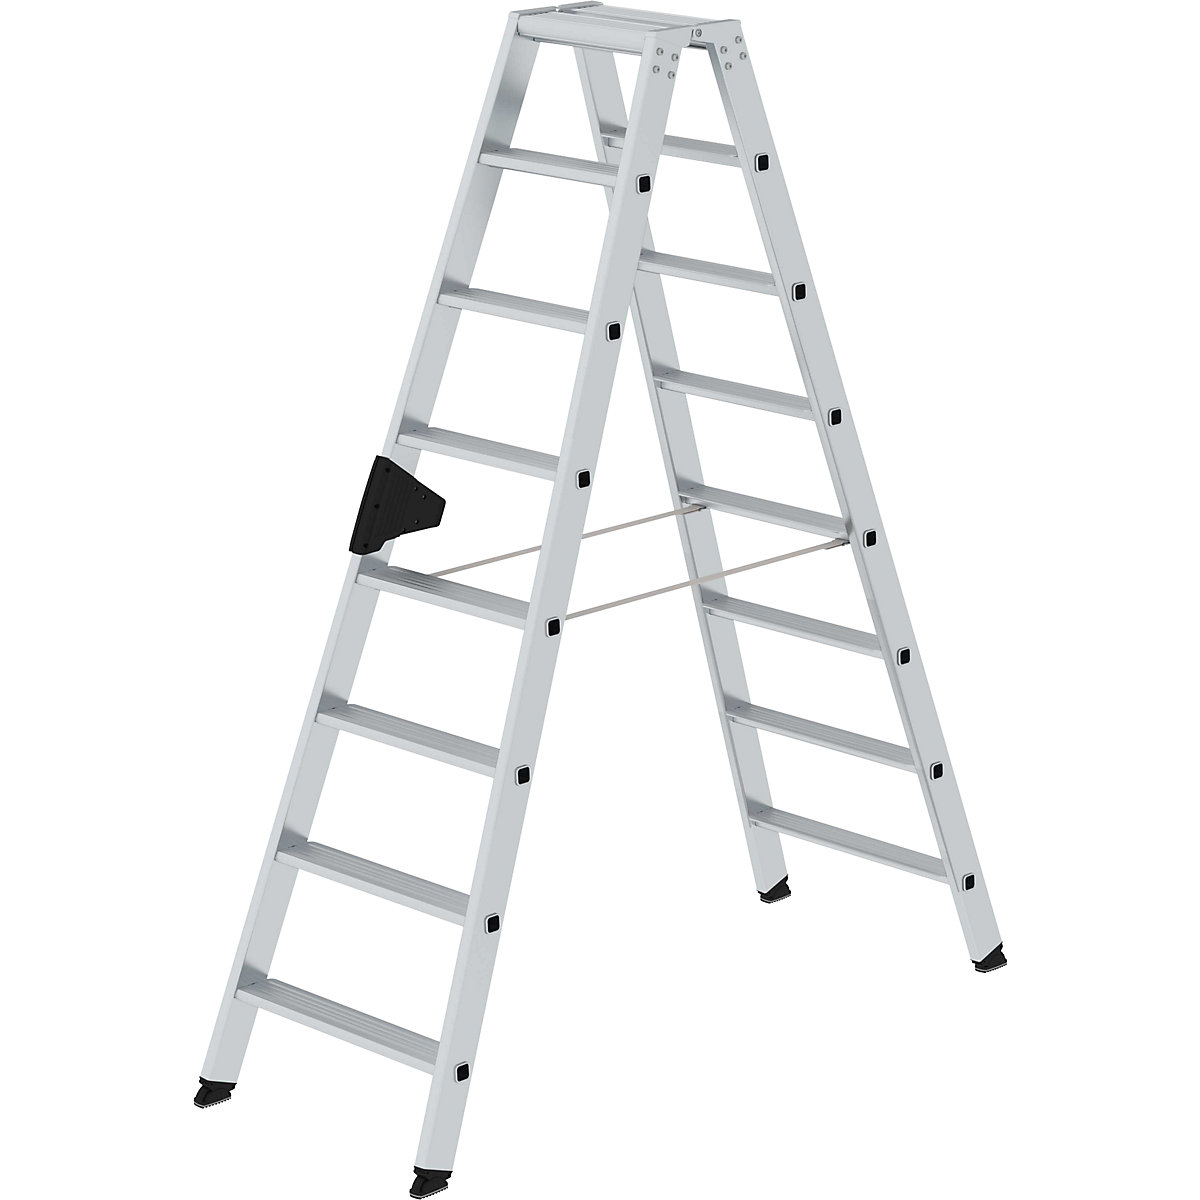 Step ladder, double sided – MUNK, comfort model with ergo pad®, 2x8 steps-14